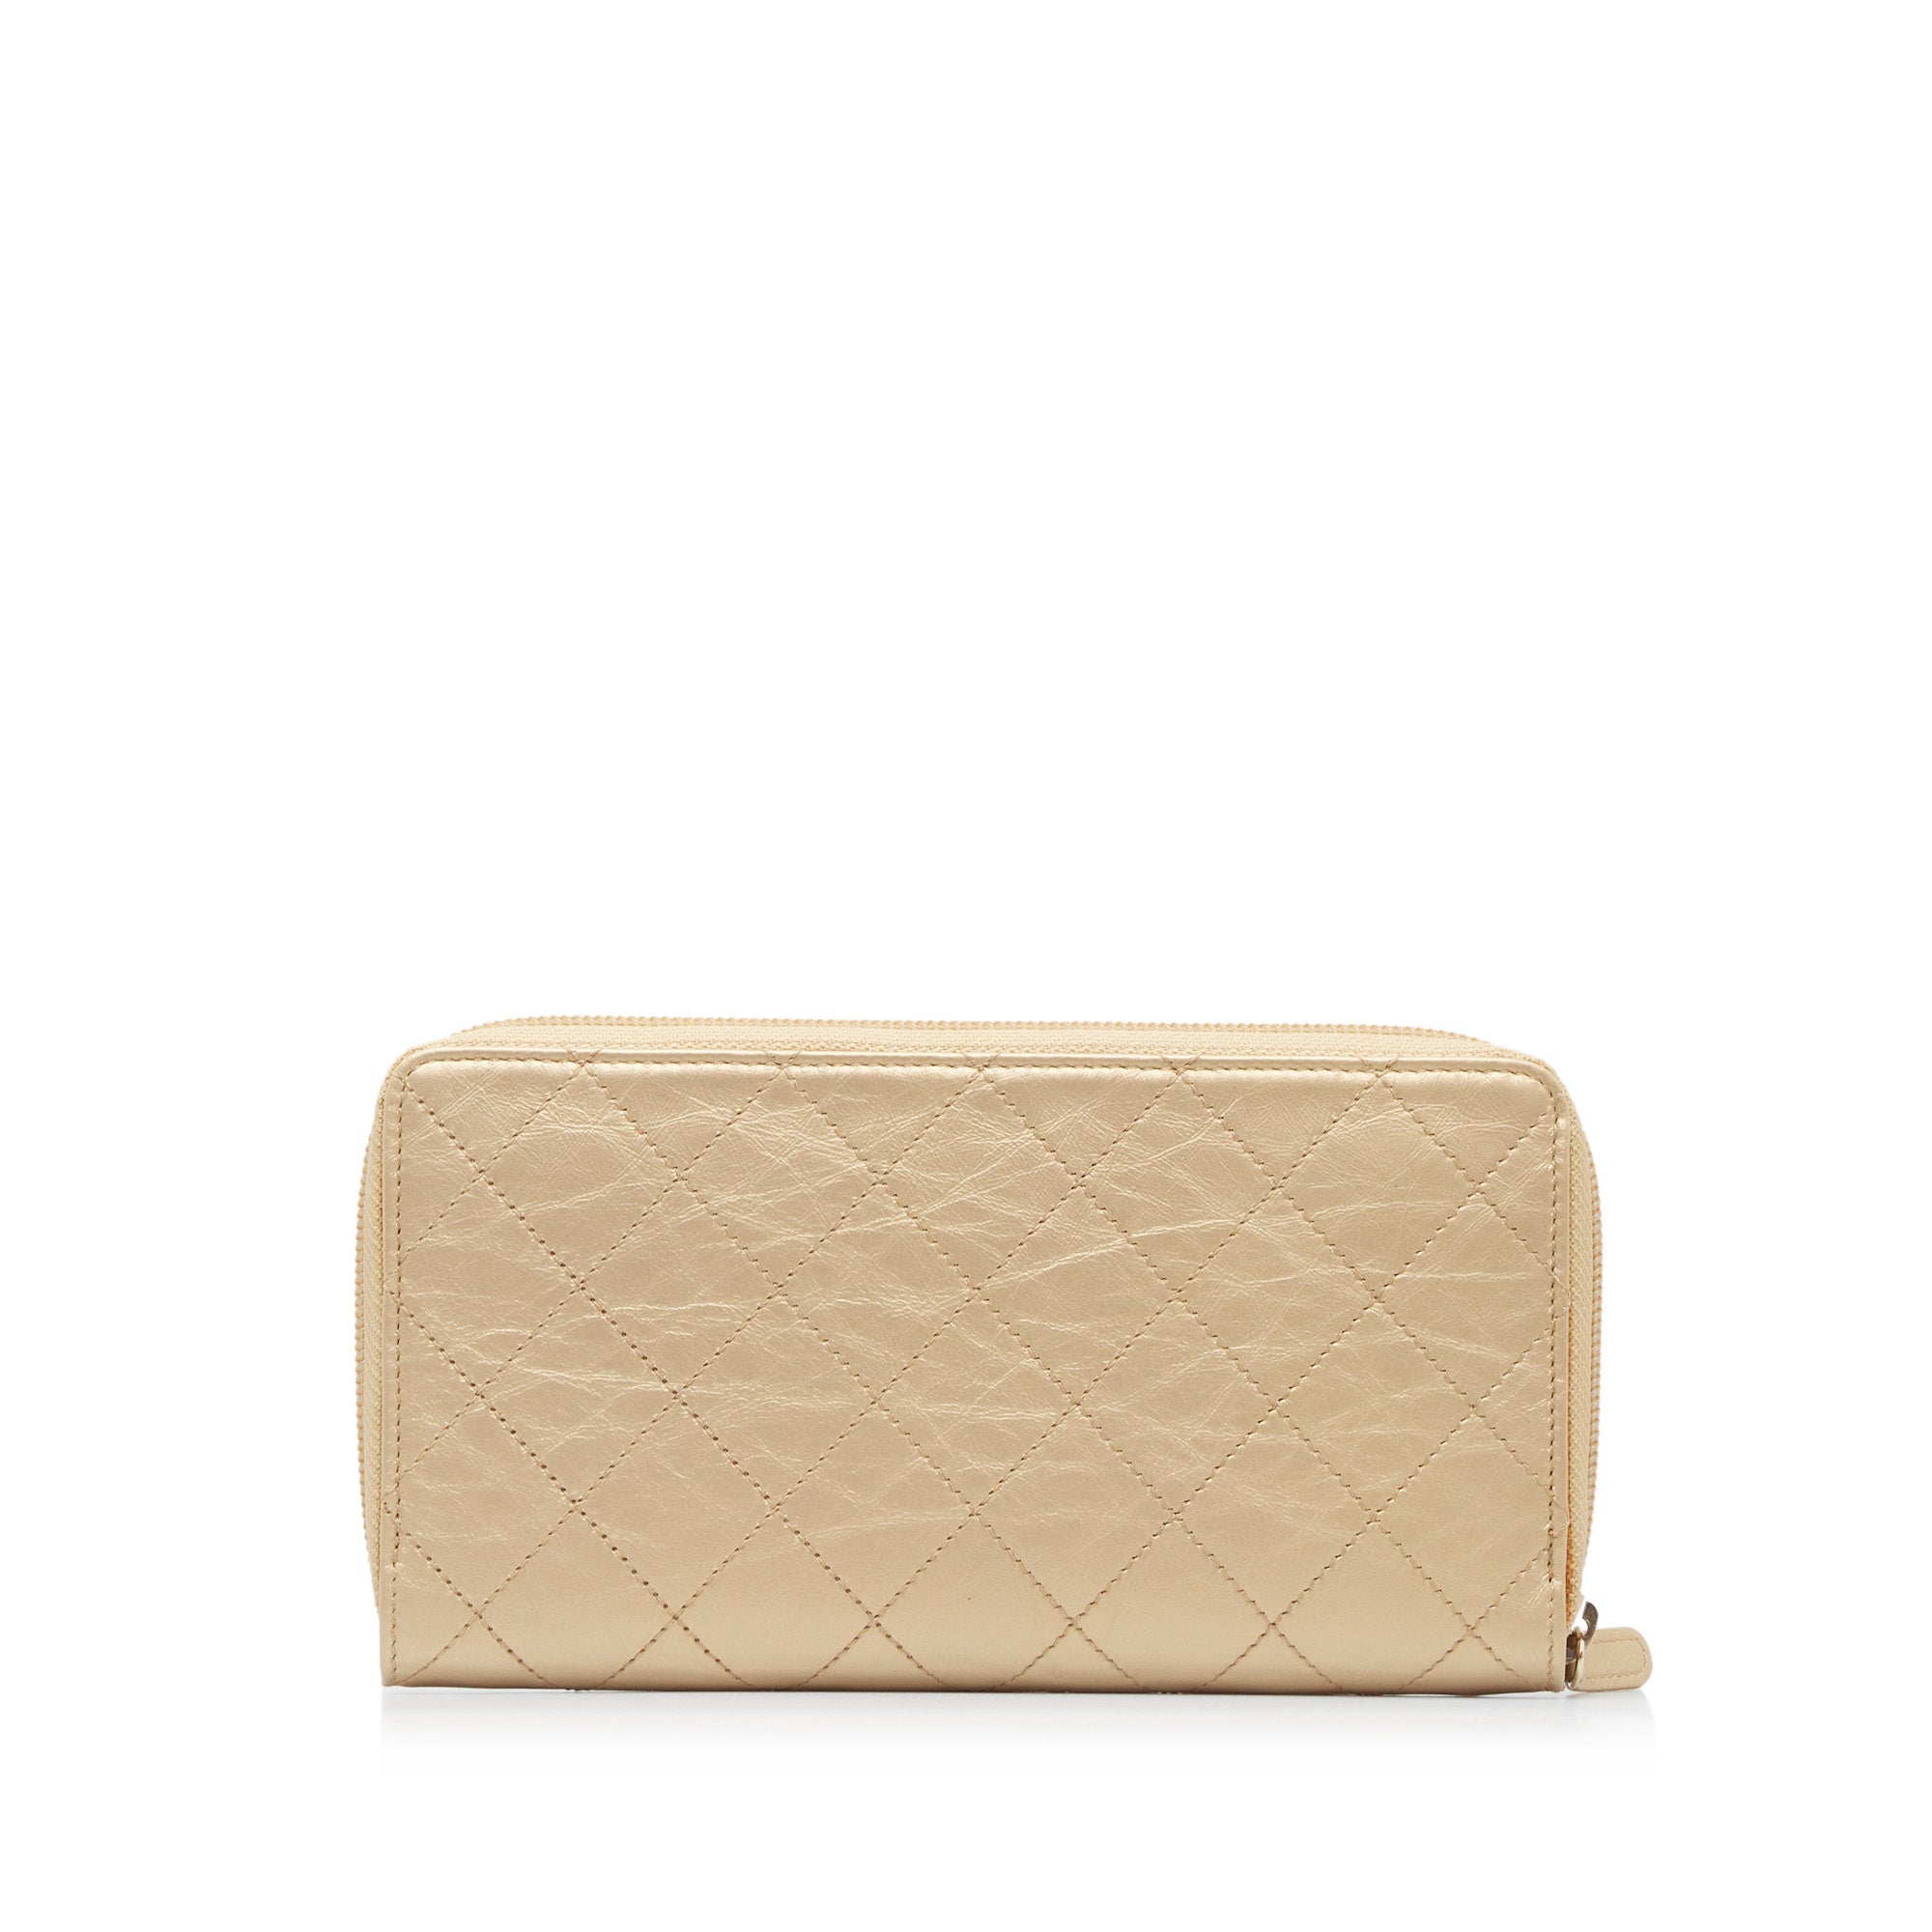 Chanel Zipped Coin Purse, Brown